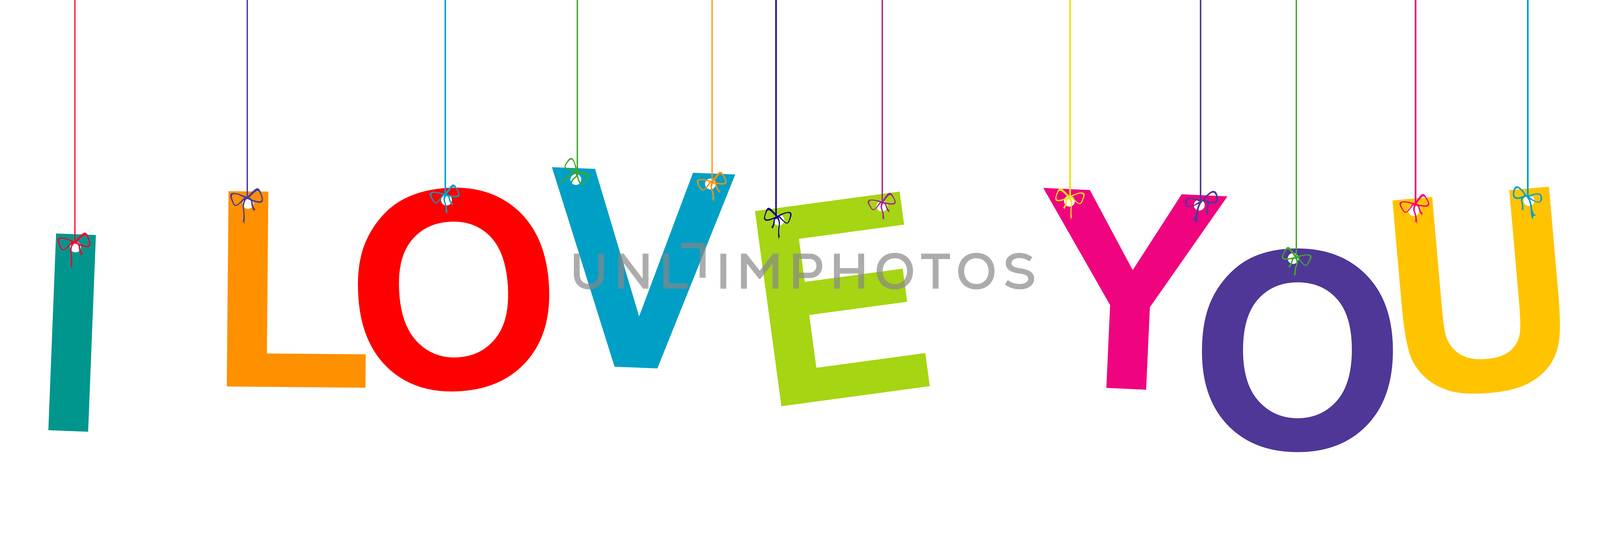 I LOVE YOU Banner with hanging letters by hibrida13